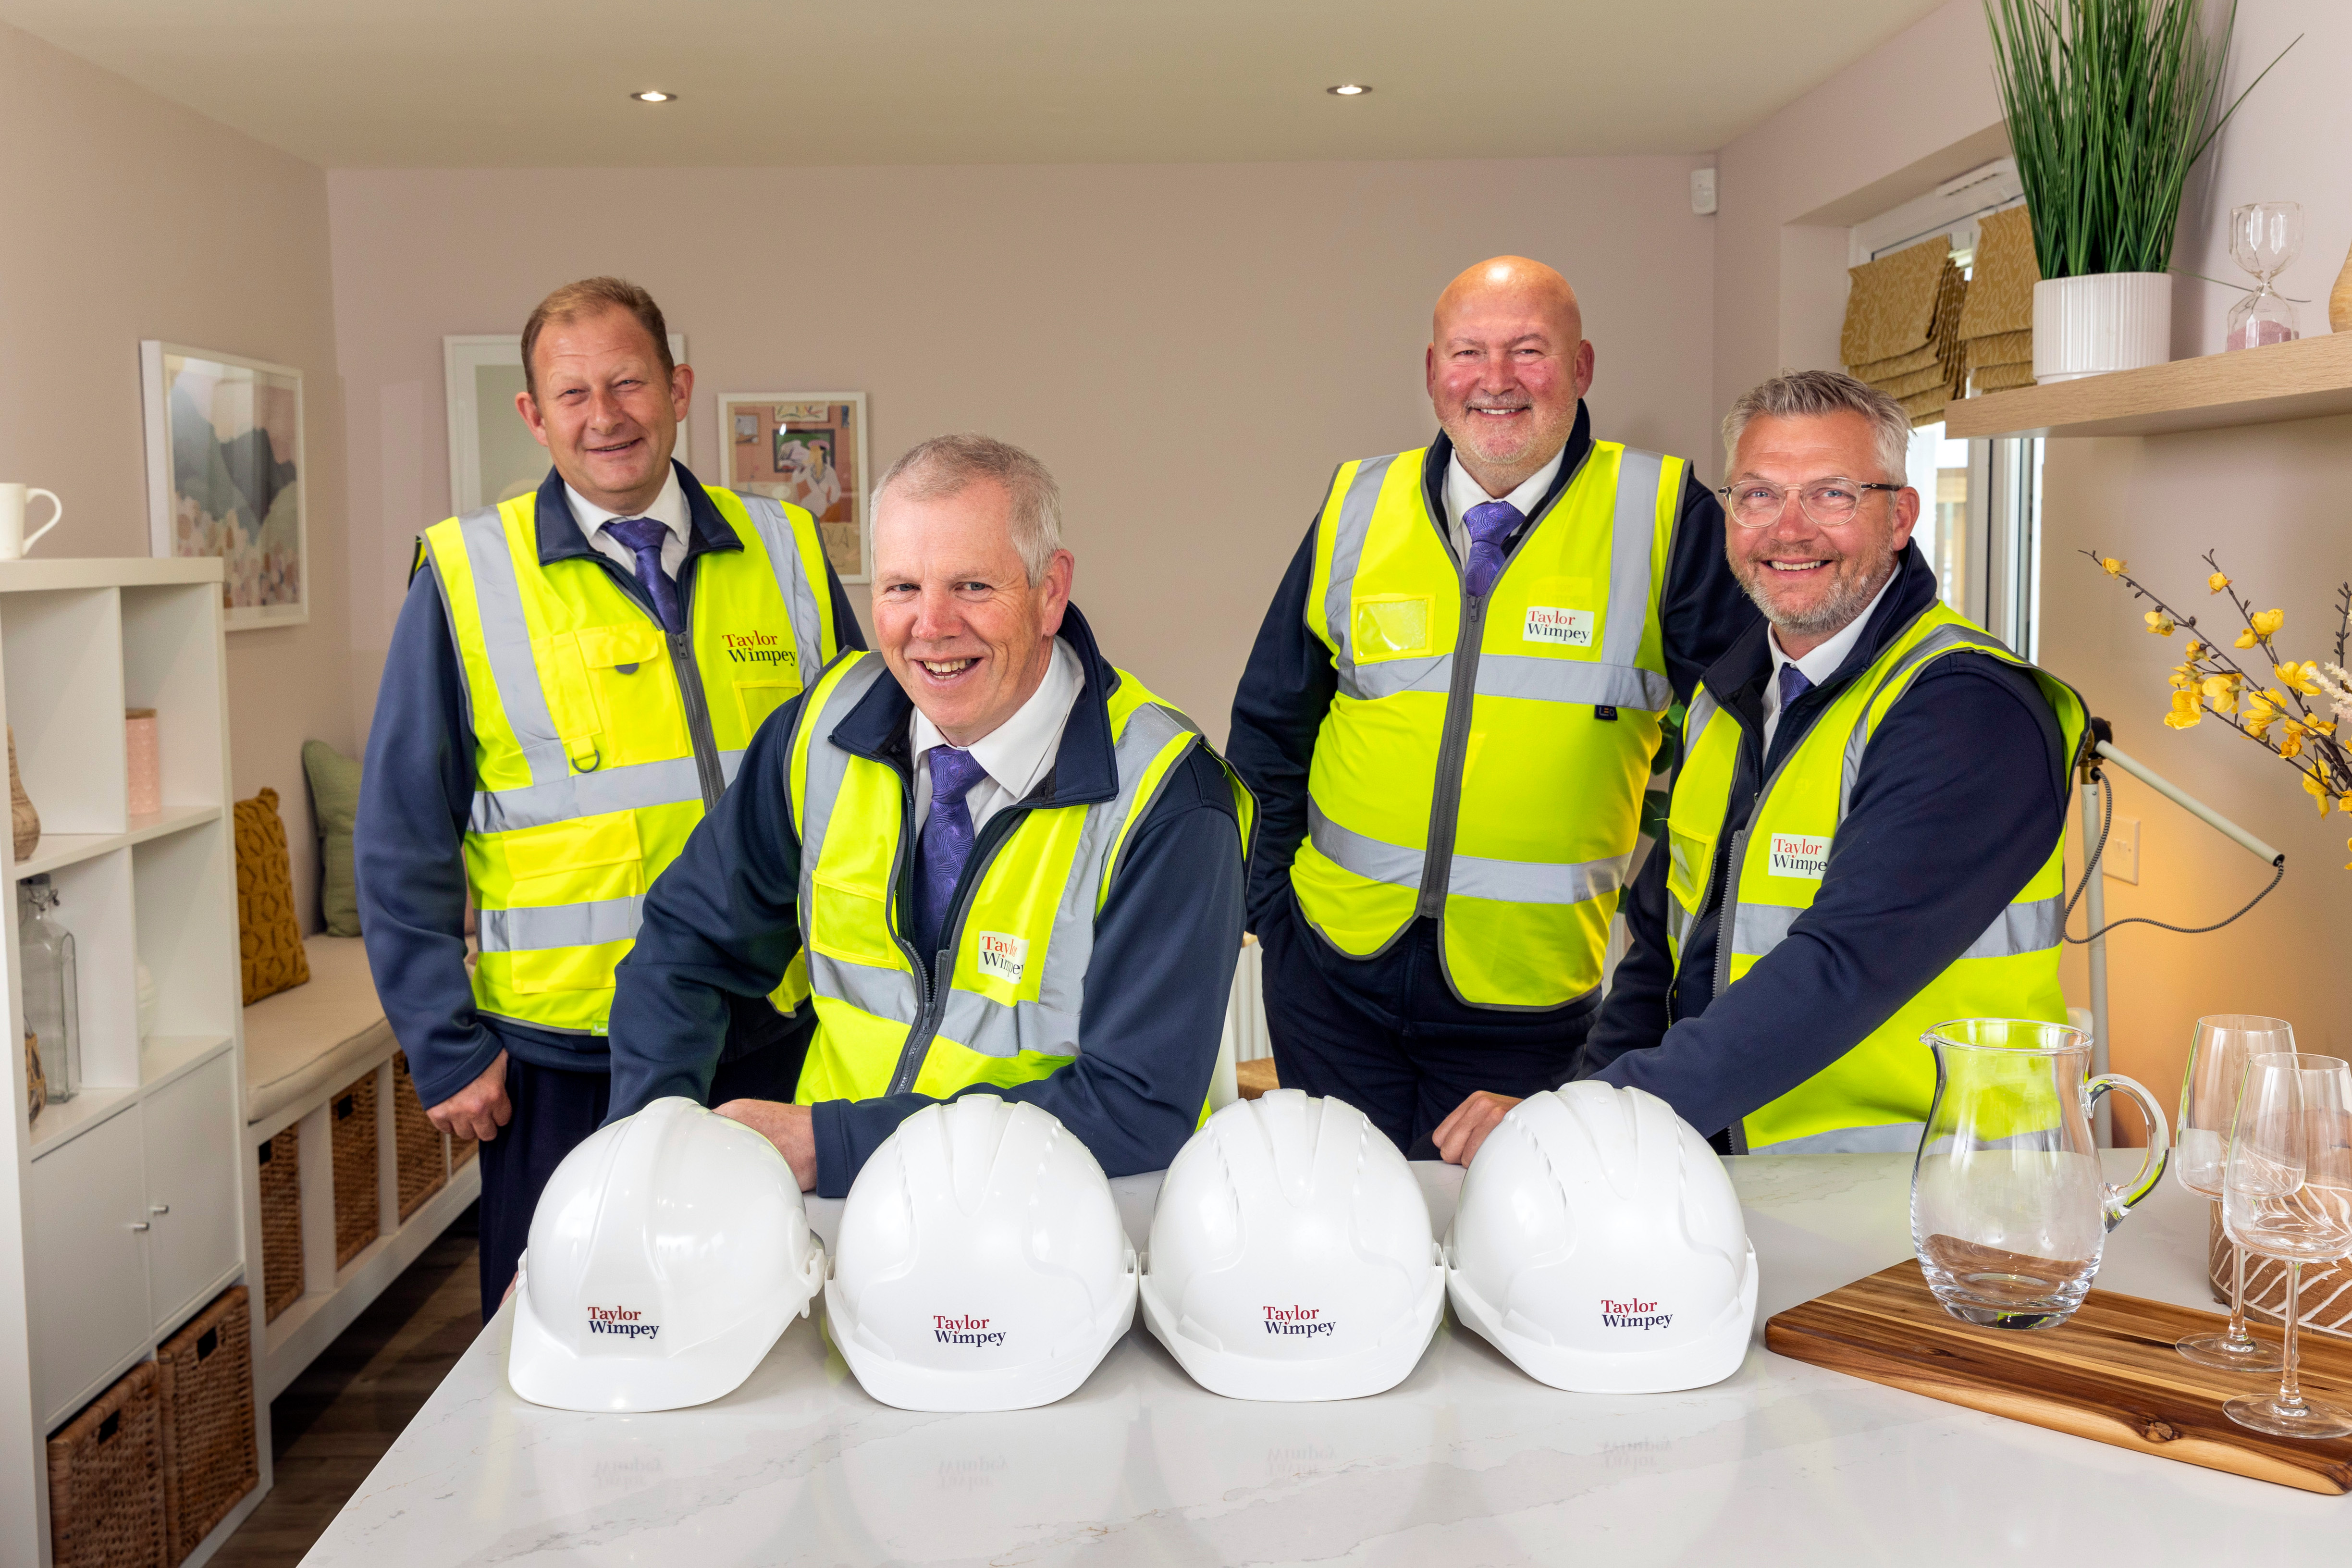 Four Taylor Wimpey site managers in West Scotland win quality awards